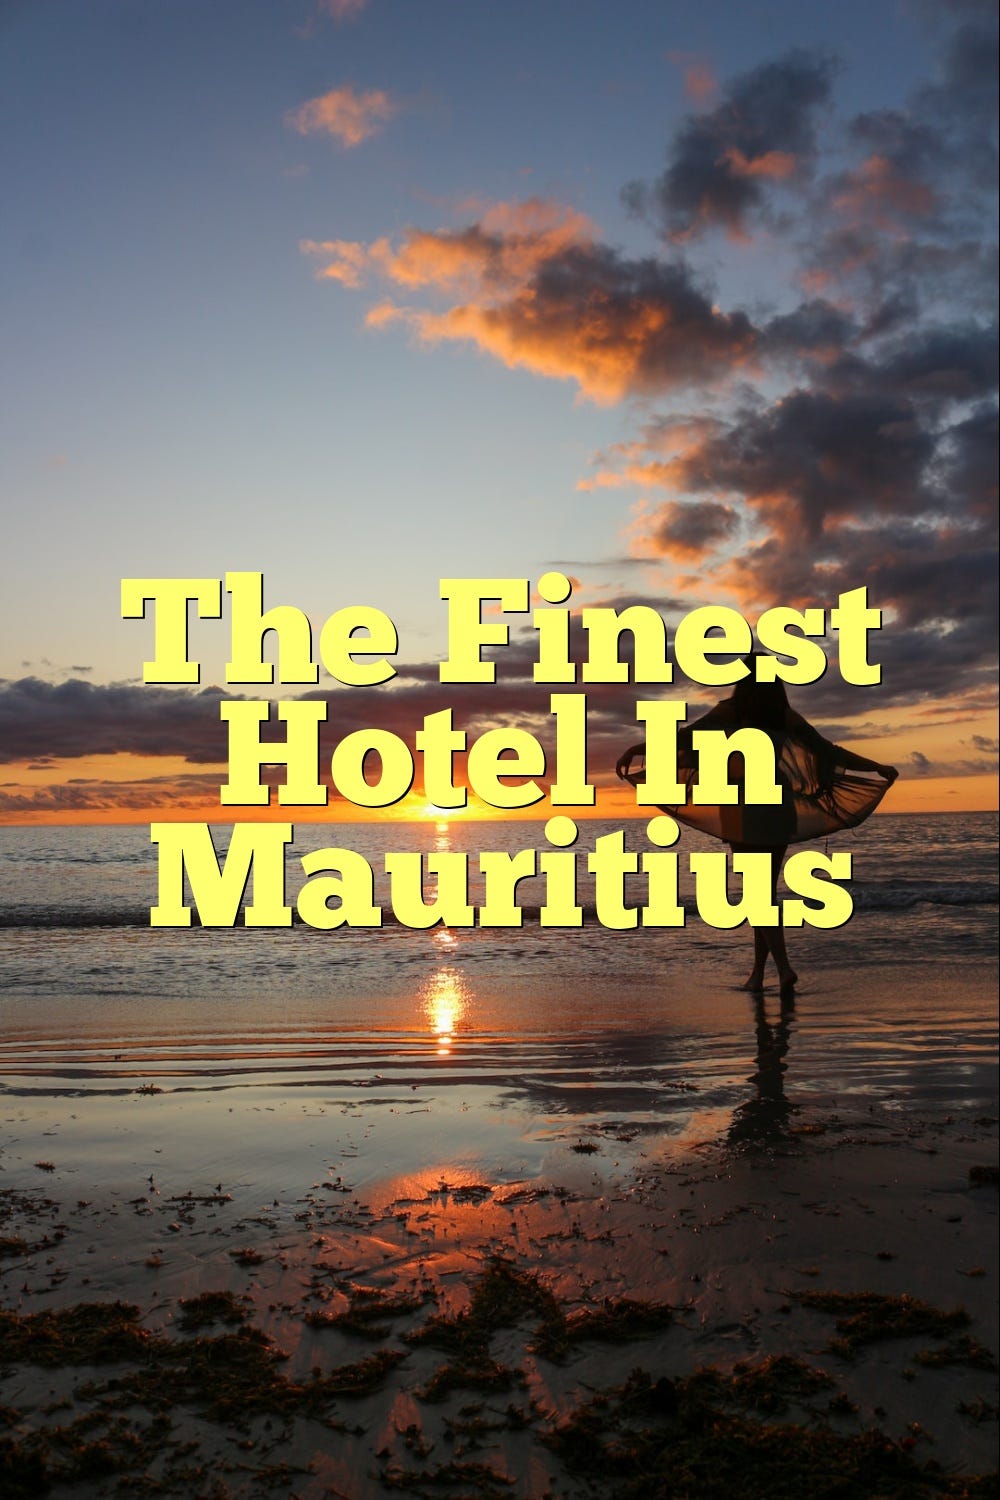 The Finest Hotel In Mauritius | by Myeasyhotel | Medium